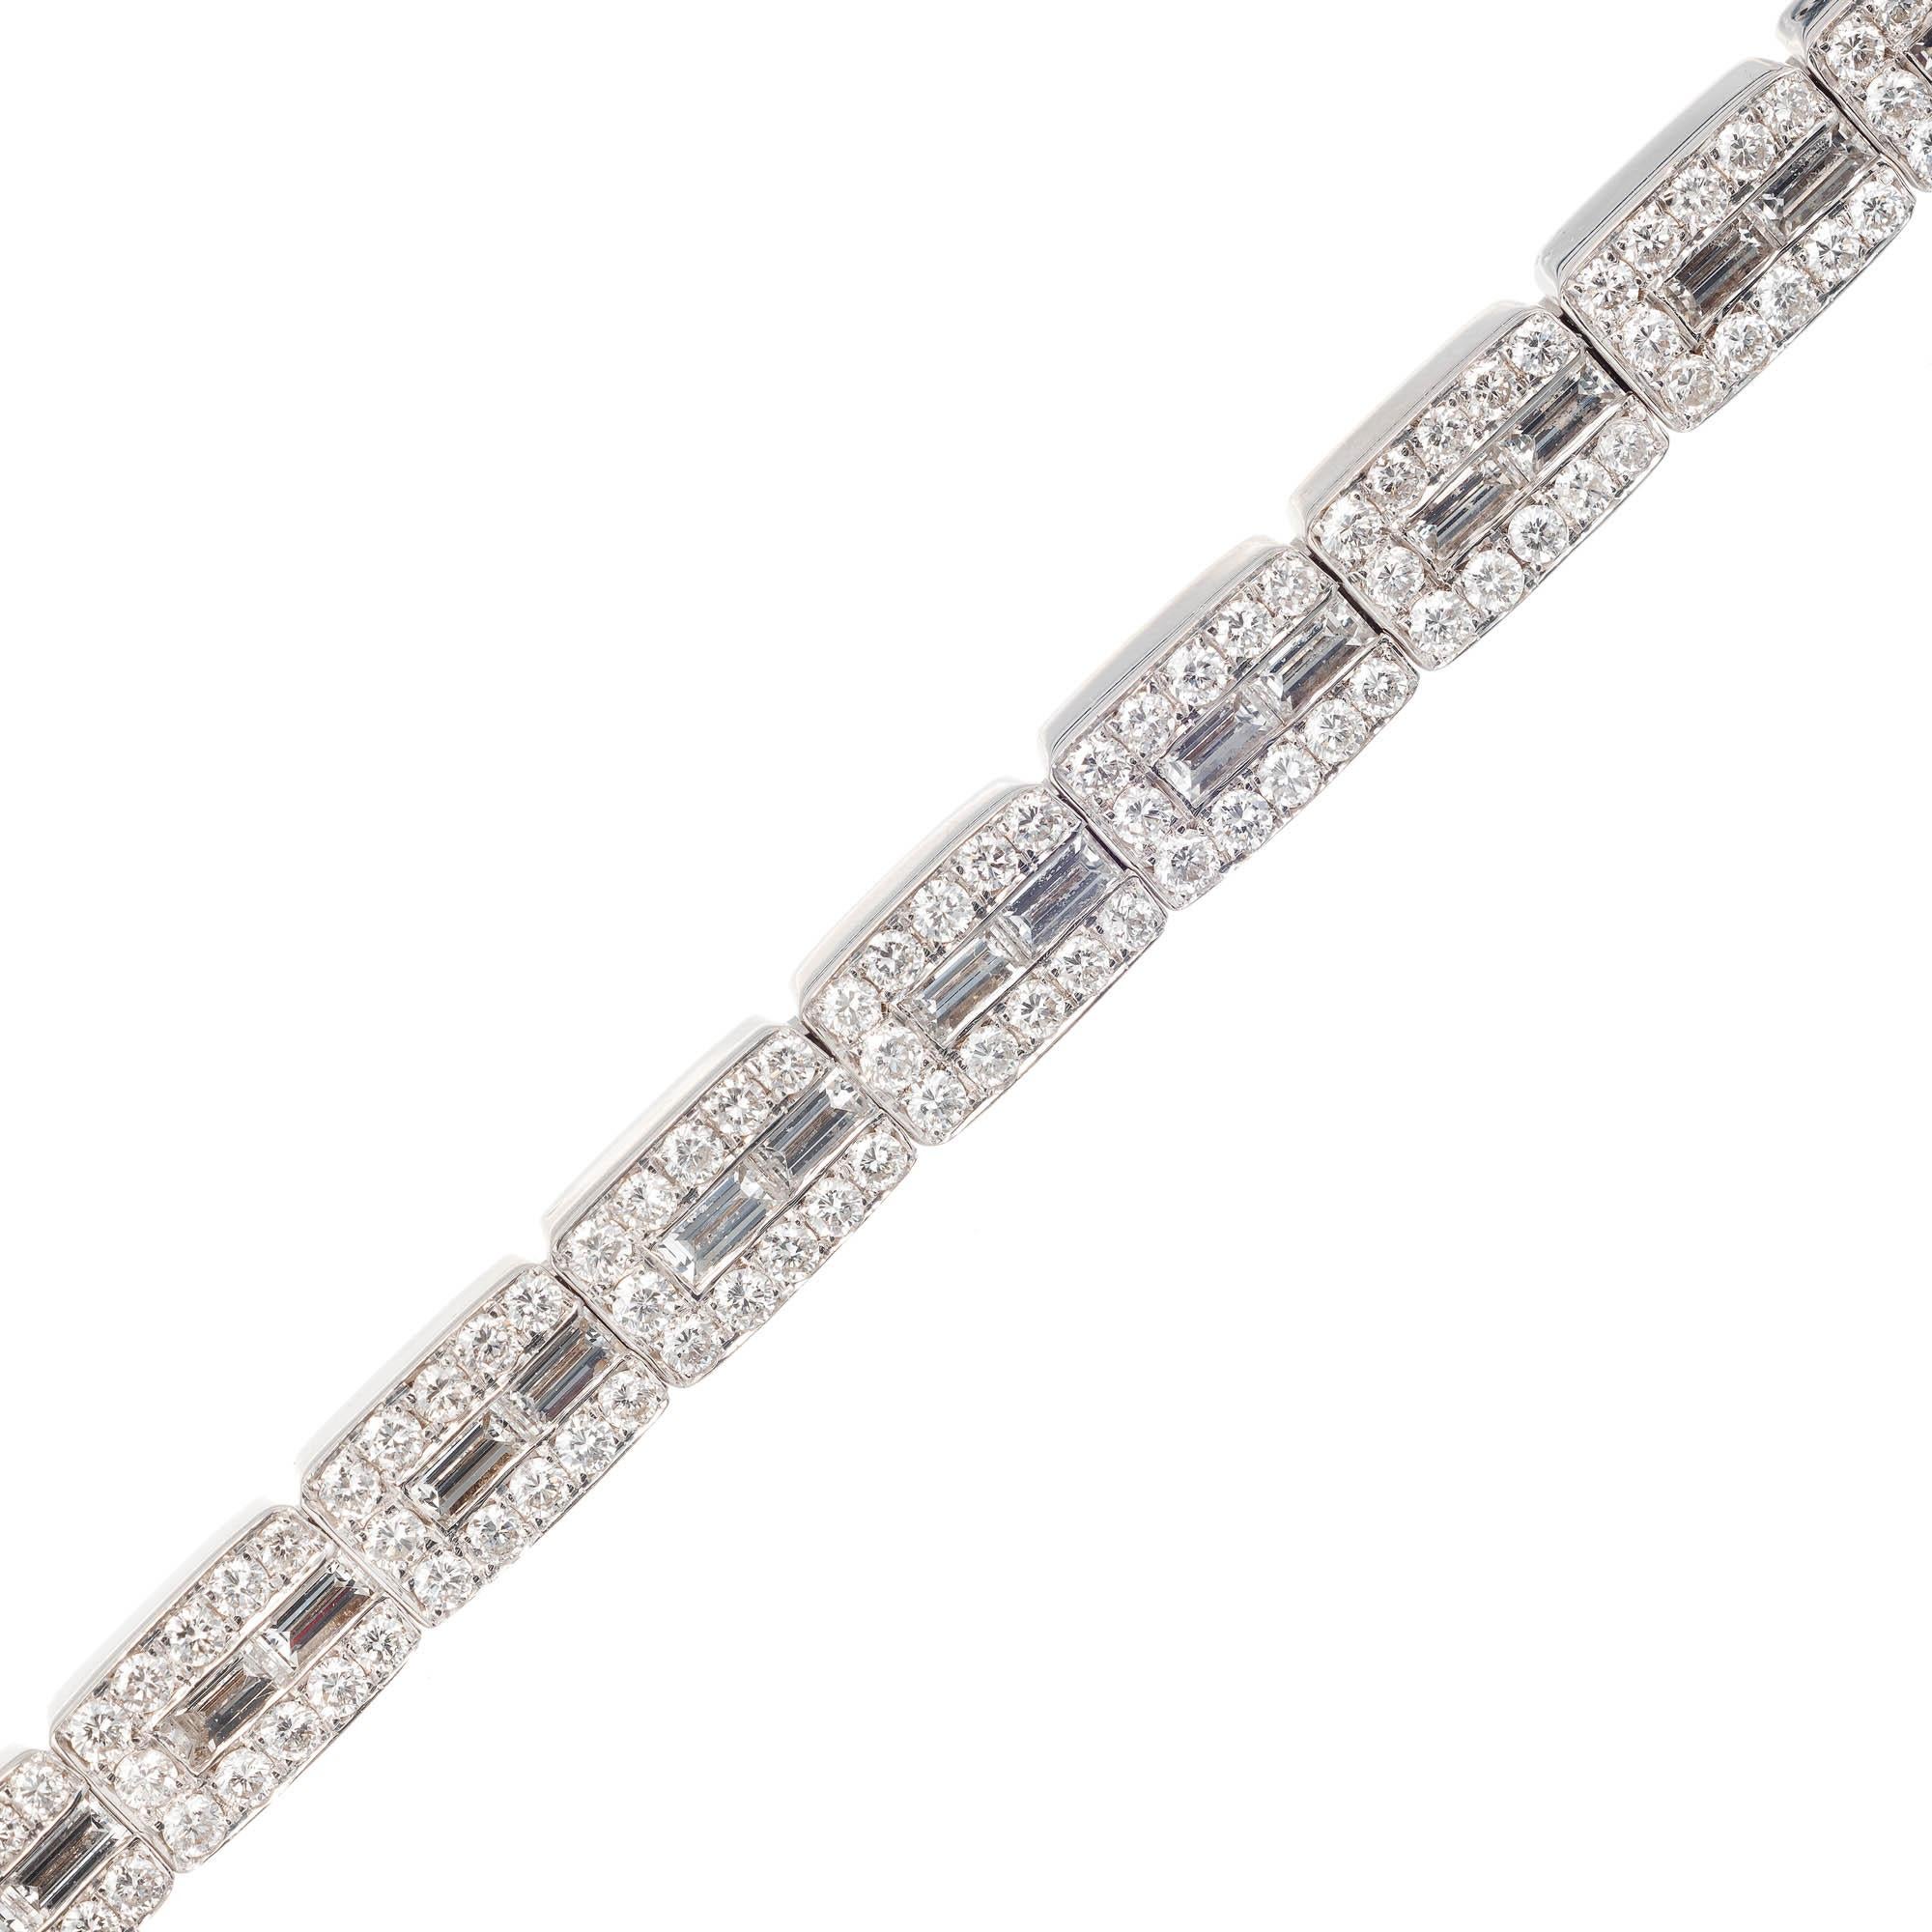 Solid 18k white gold diamond bracelet. Rectangular link bracelet bead and channel set with 2 outside rows of round Diamonds and a center row of Baguette Diamonds.  4.25cts total of F-G, VS Diamonds. Build in hidden catch and secure underside